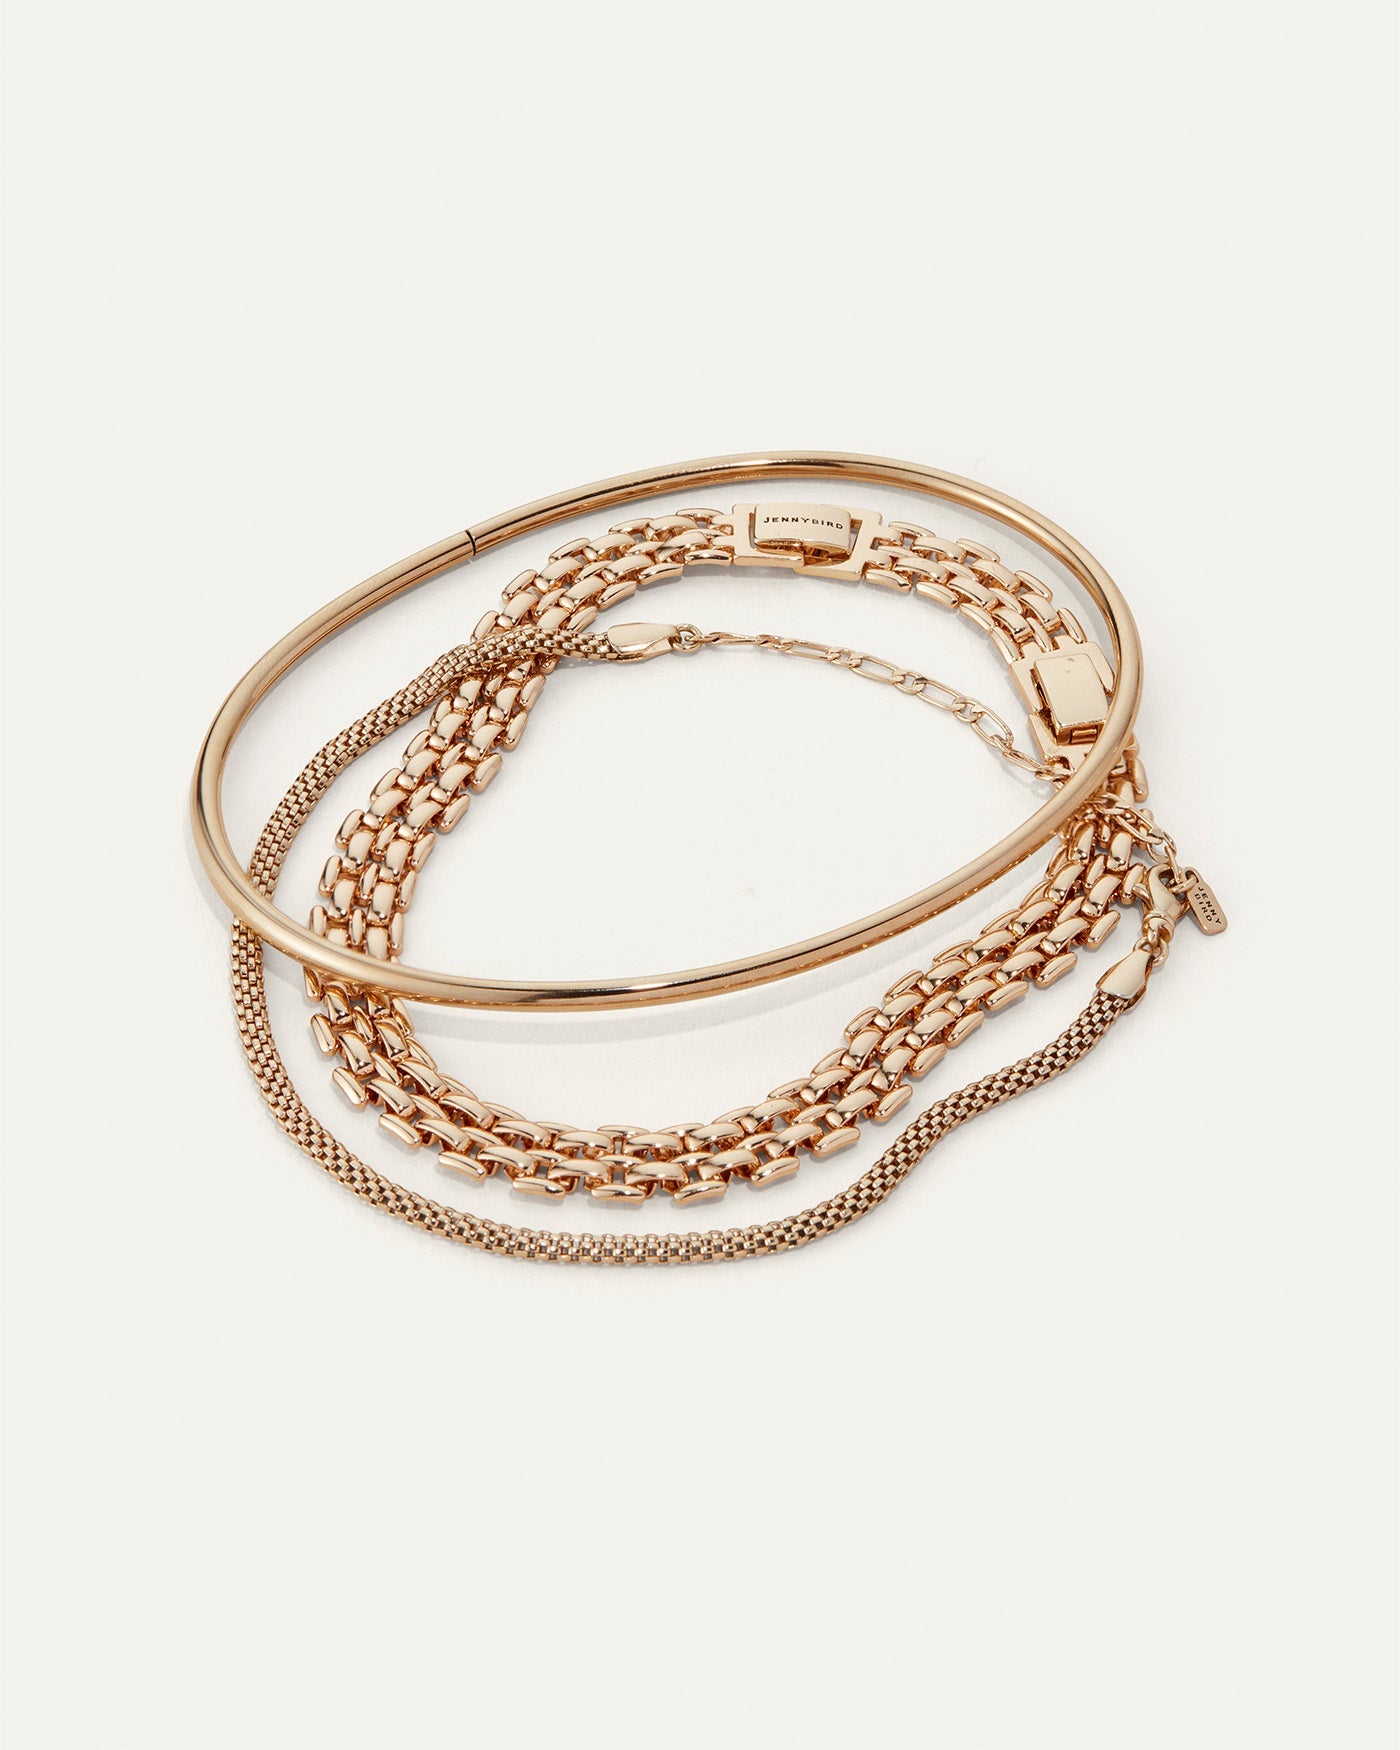 The Textured Anklet Stack